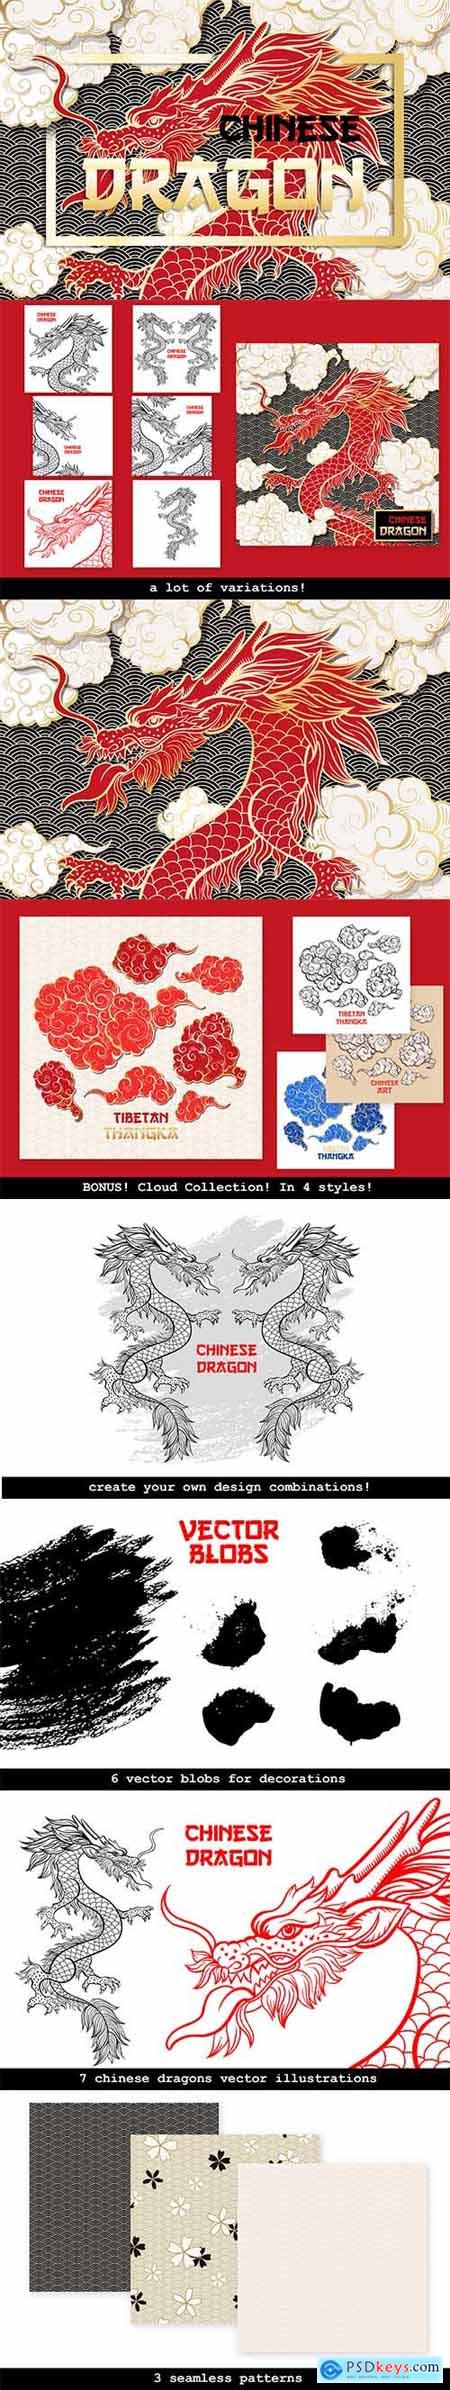 Chinese Dragon Vector Illustrations, Clouds and Patterns